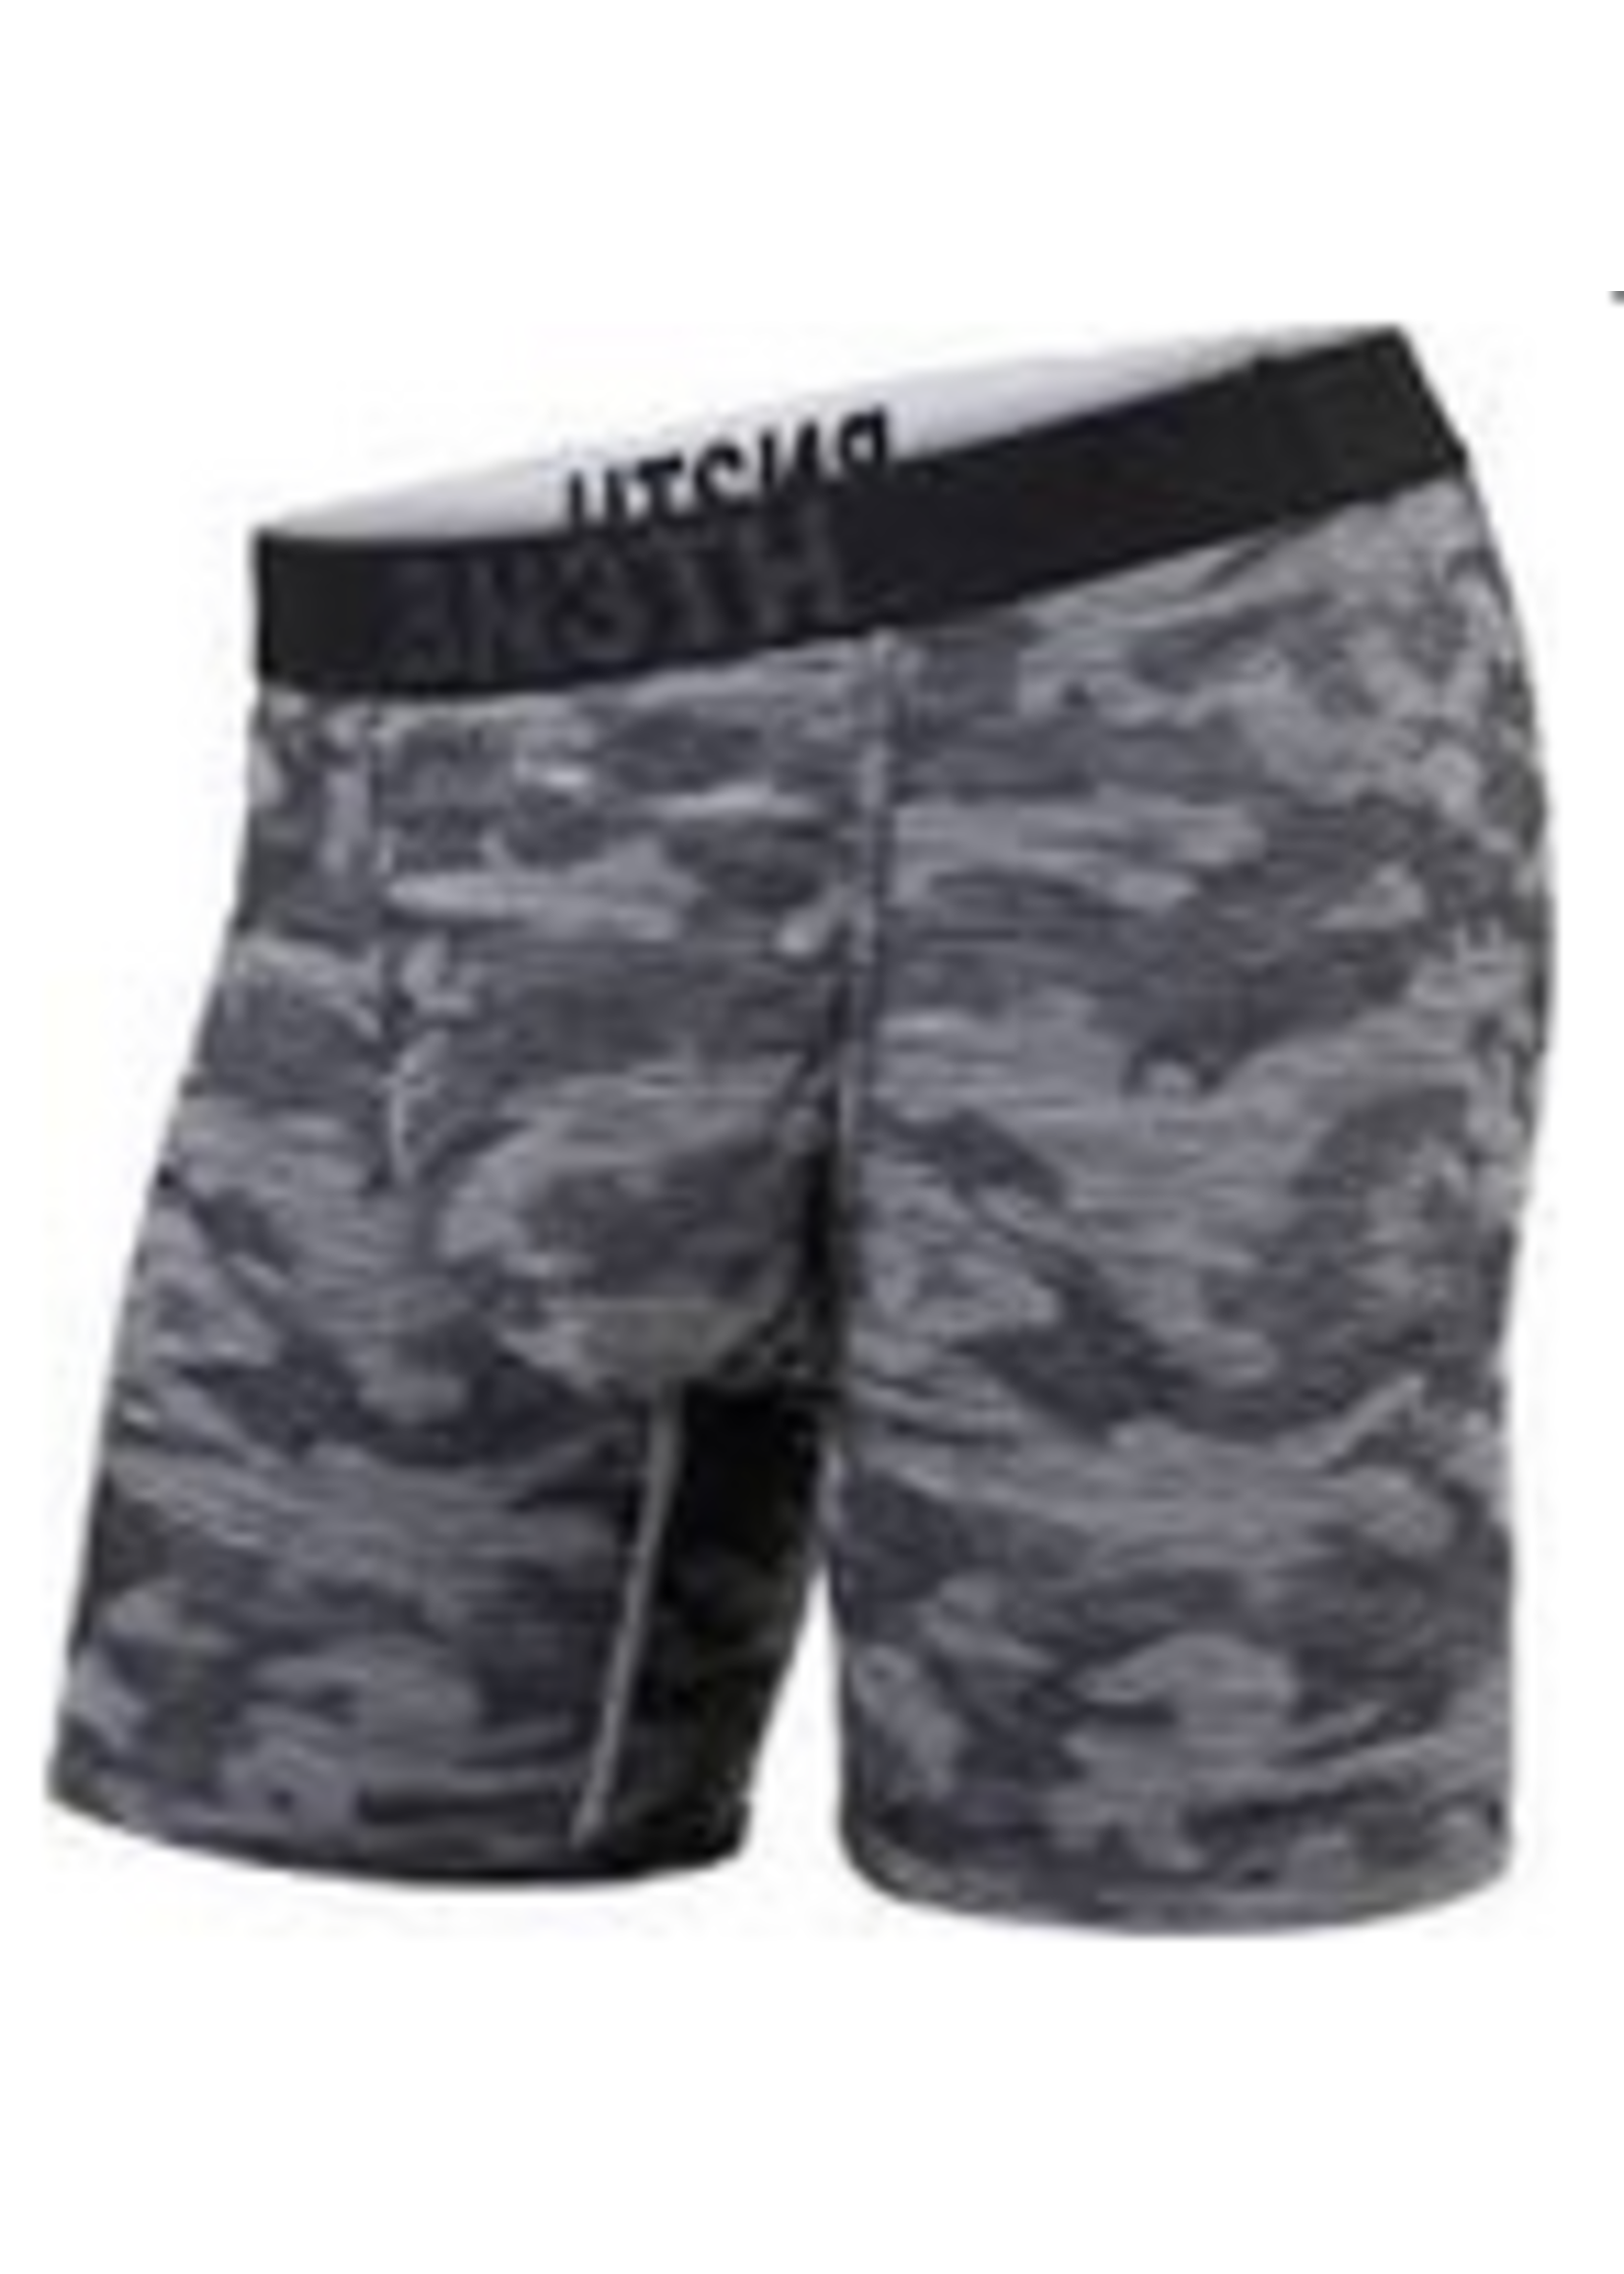 Classic Boxer Brief: Pine/Covert Camo 2 Pack